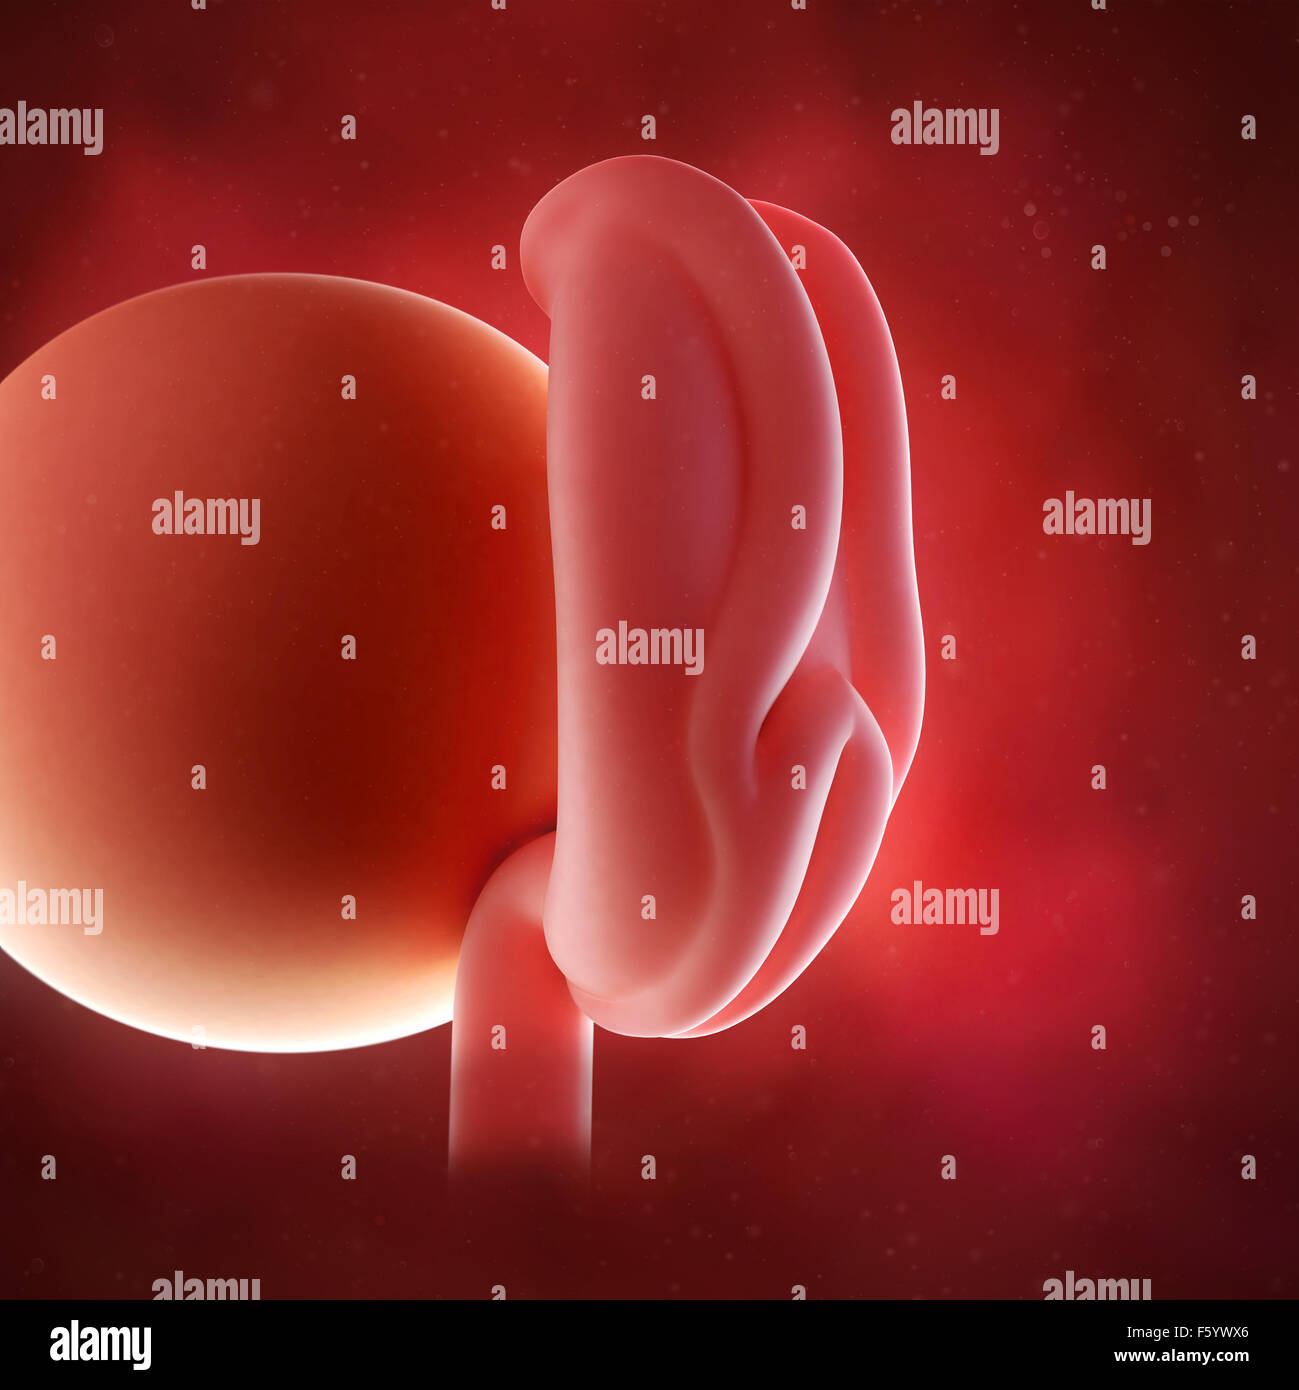 medical accurate 3d illustration of a fetus week 4 Stock Photo